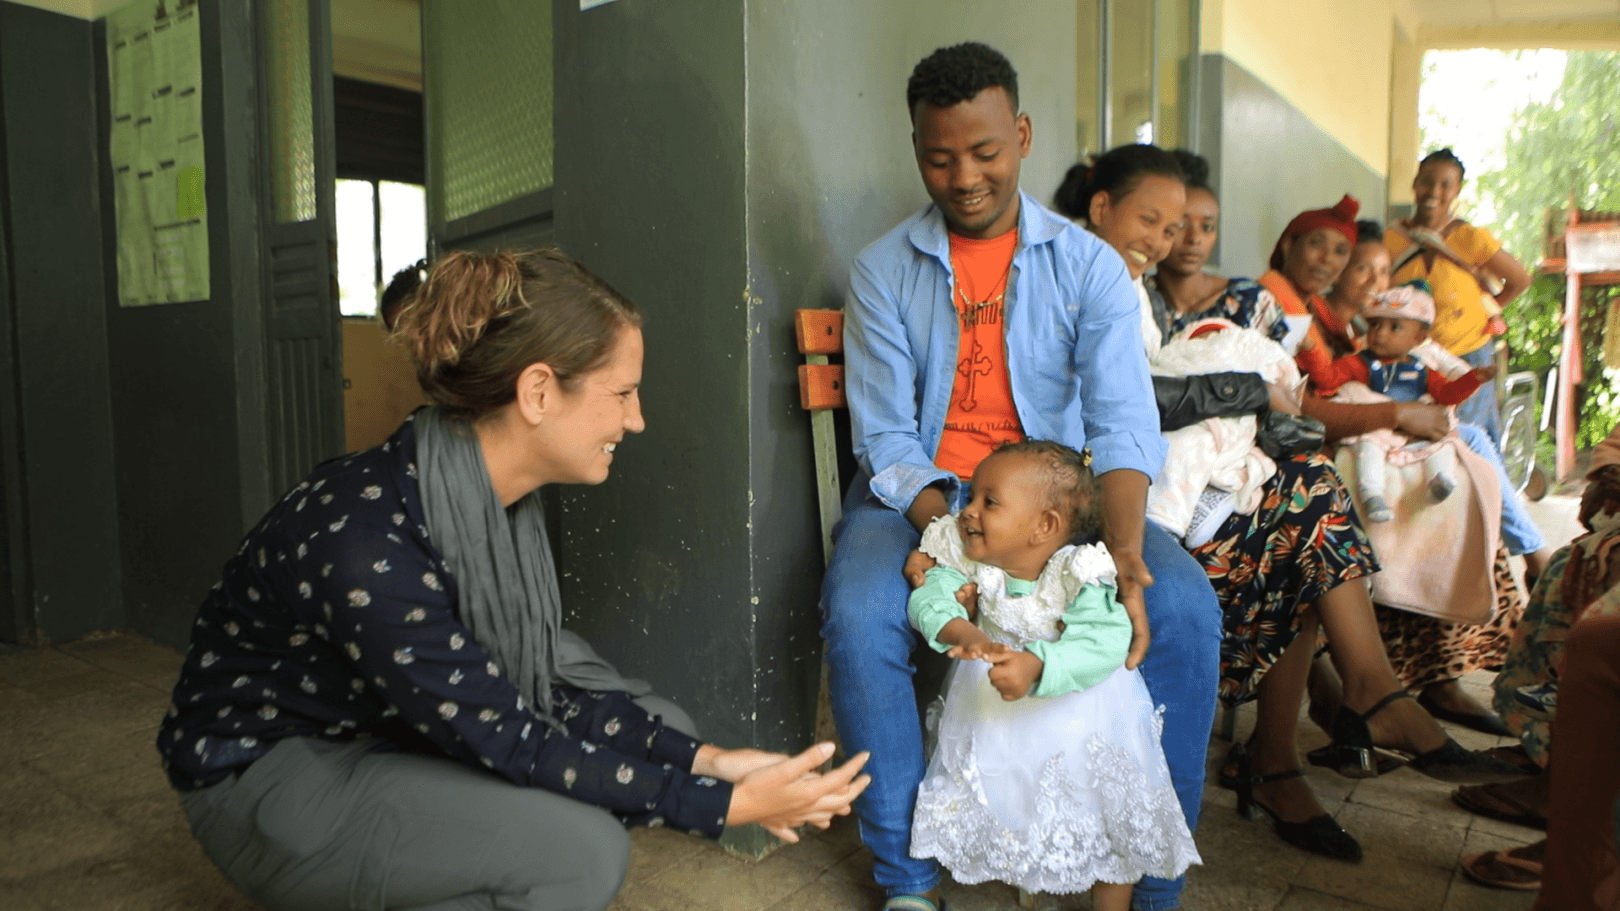 Walgreens team member Dorothy Loy (left) laughs with a father and daughter at a health clinic in Ethiopia.